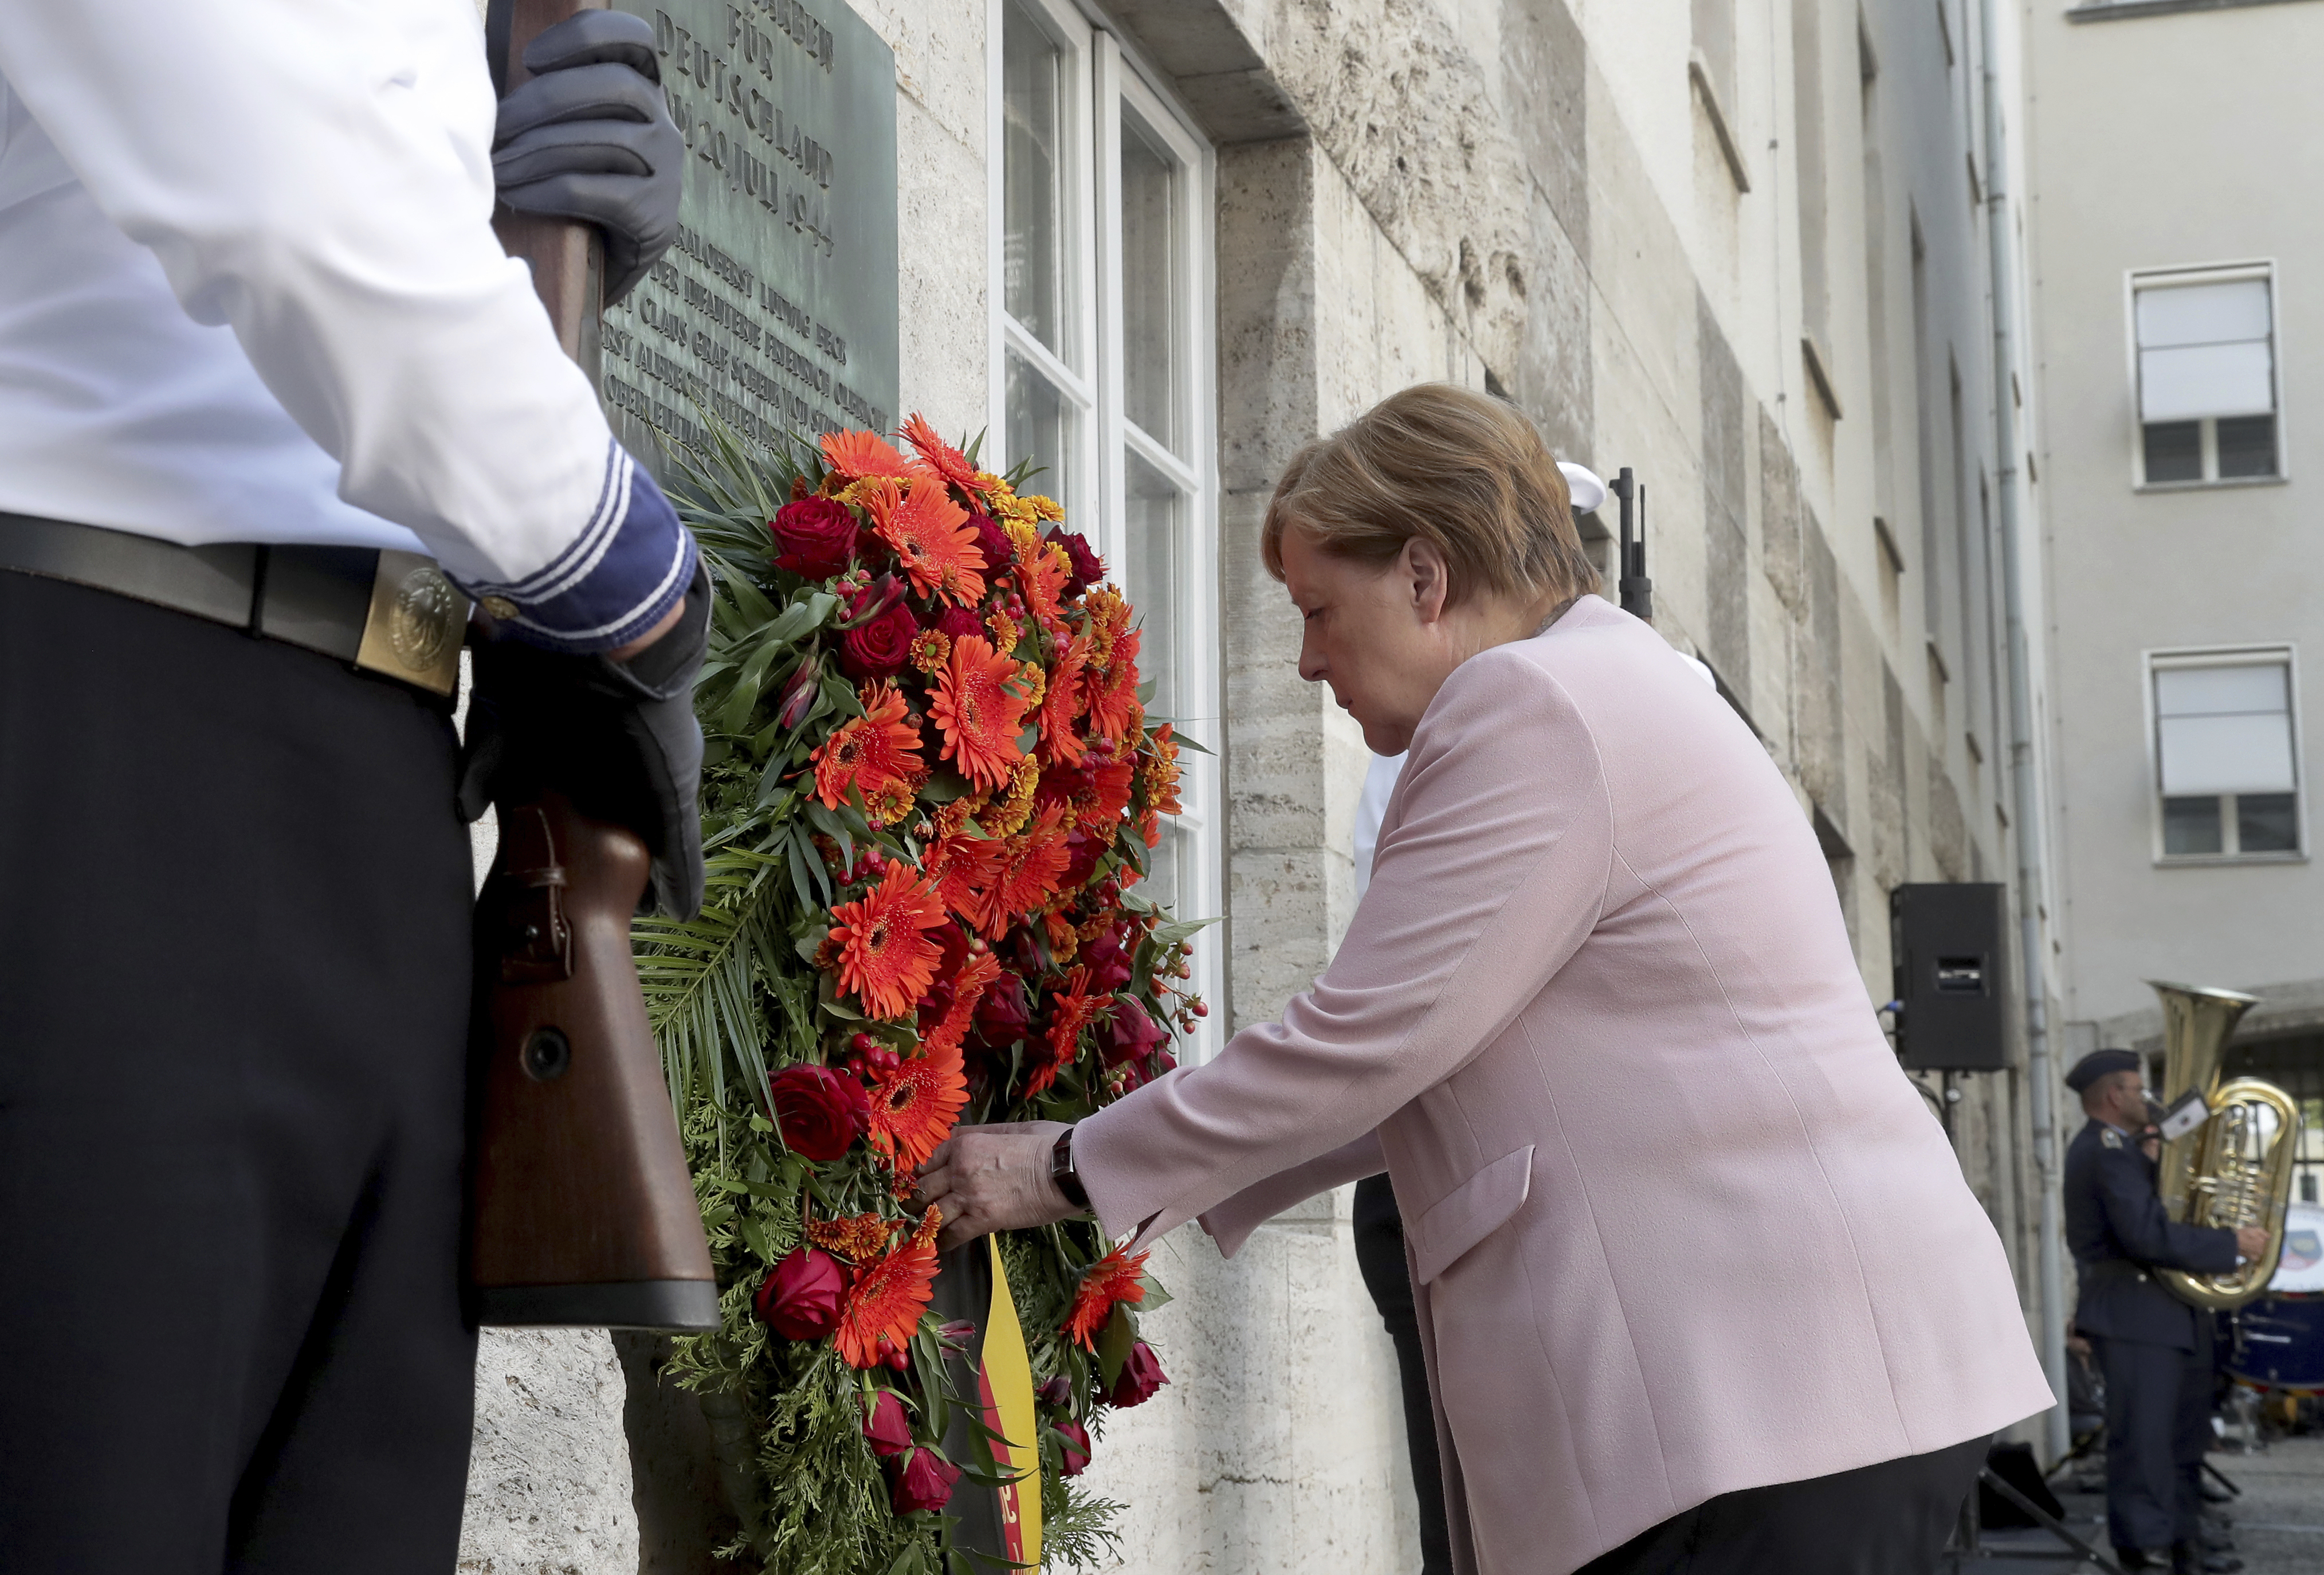 German Chancellor Angela Merkel adjusts a wreath during a memorial event at the Defence Ministry in Berlin, Germany, Saturday, July 20, 2019. On July 20, 2019 Germany marks the 75th anniversary of the failed attempt to kill Hitler in 1944. (AP Photo/Michael Sohn)